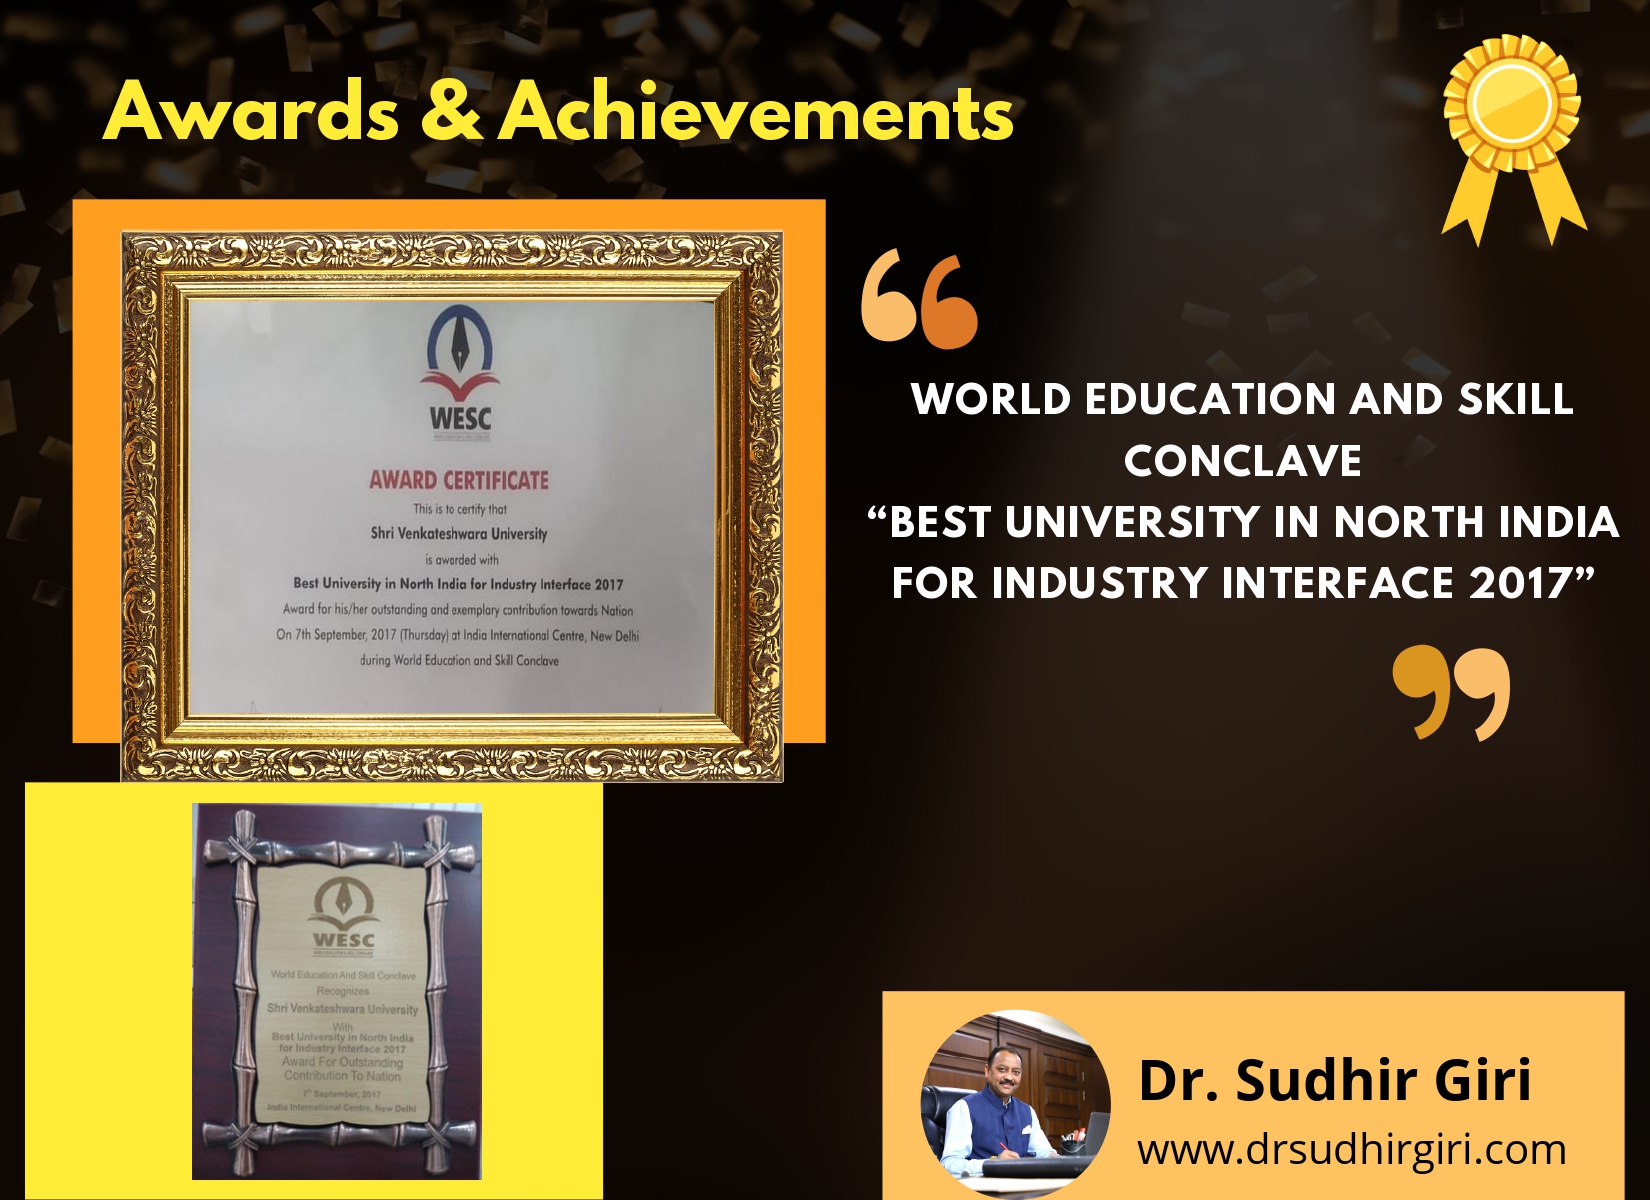 Sudhir Giri - World Education and Skill Conclave “Best University in North India for Industry Interface 2017”